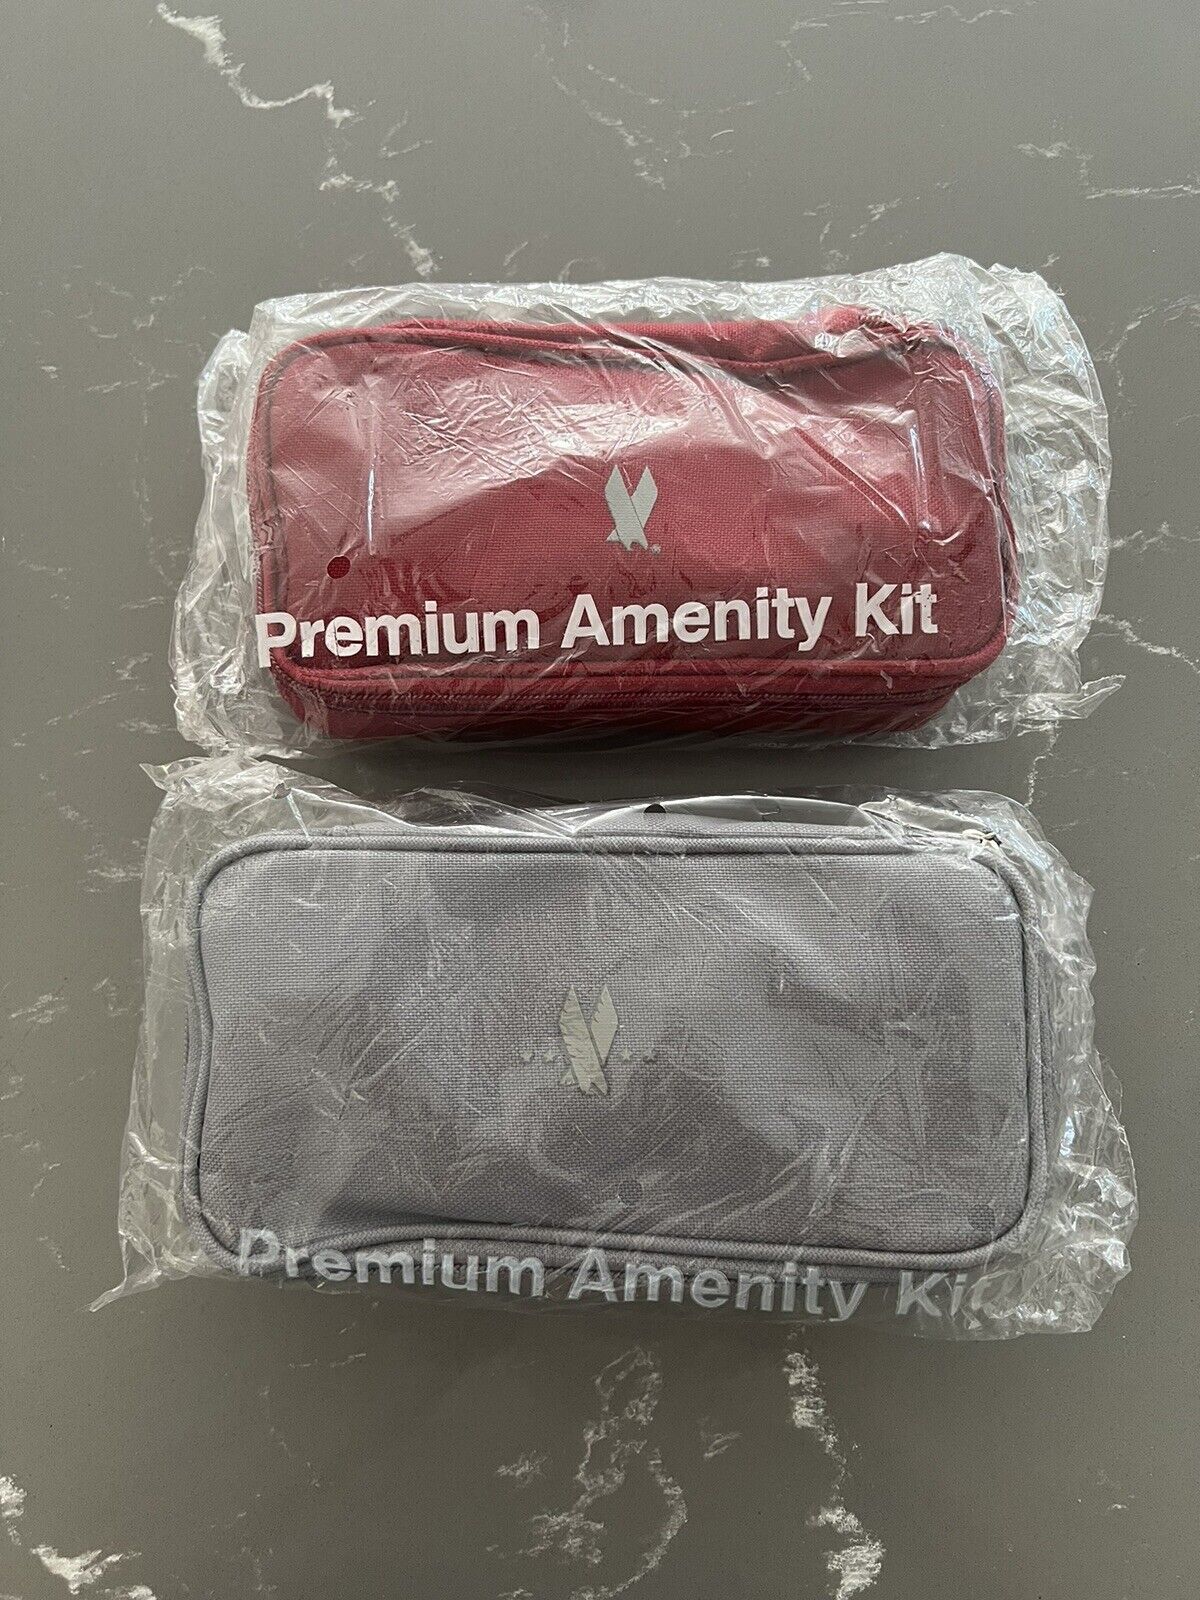 2x AMERICAN AIRLINES Fist Class Amenity Kits *** Sealed ****